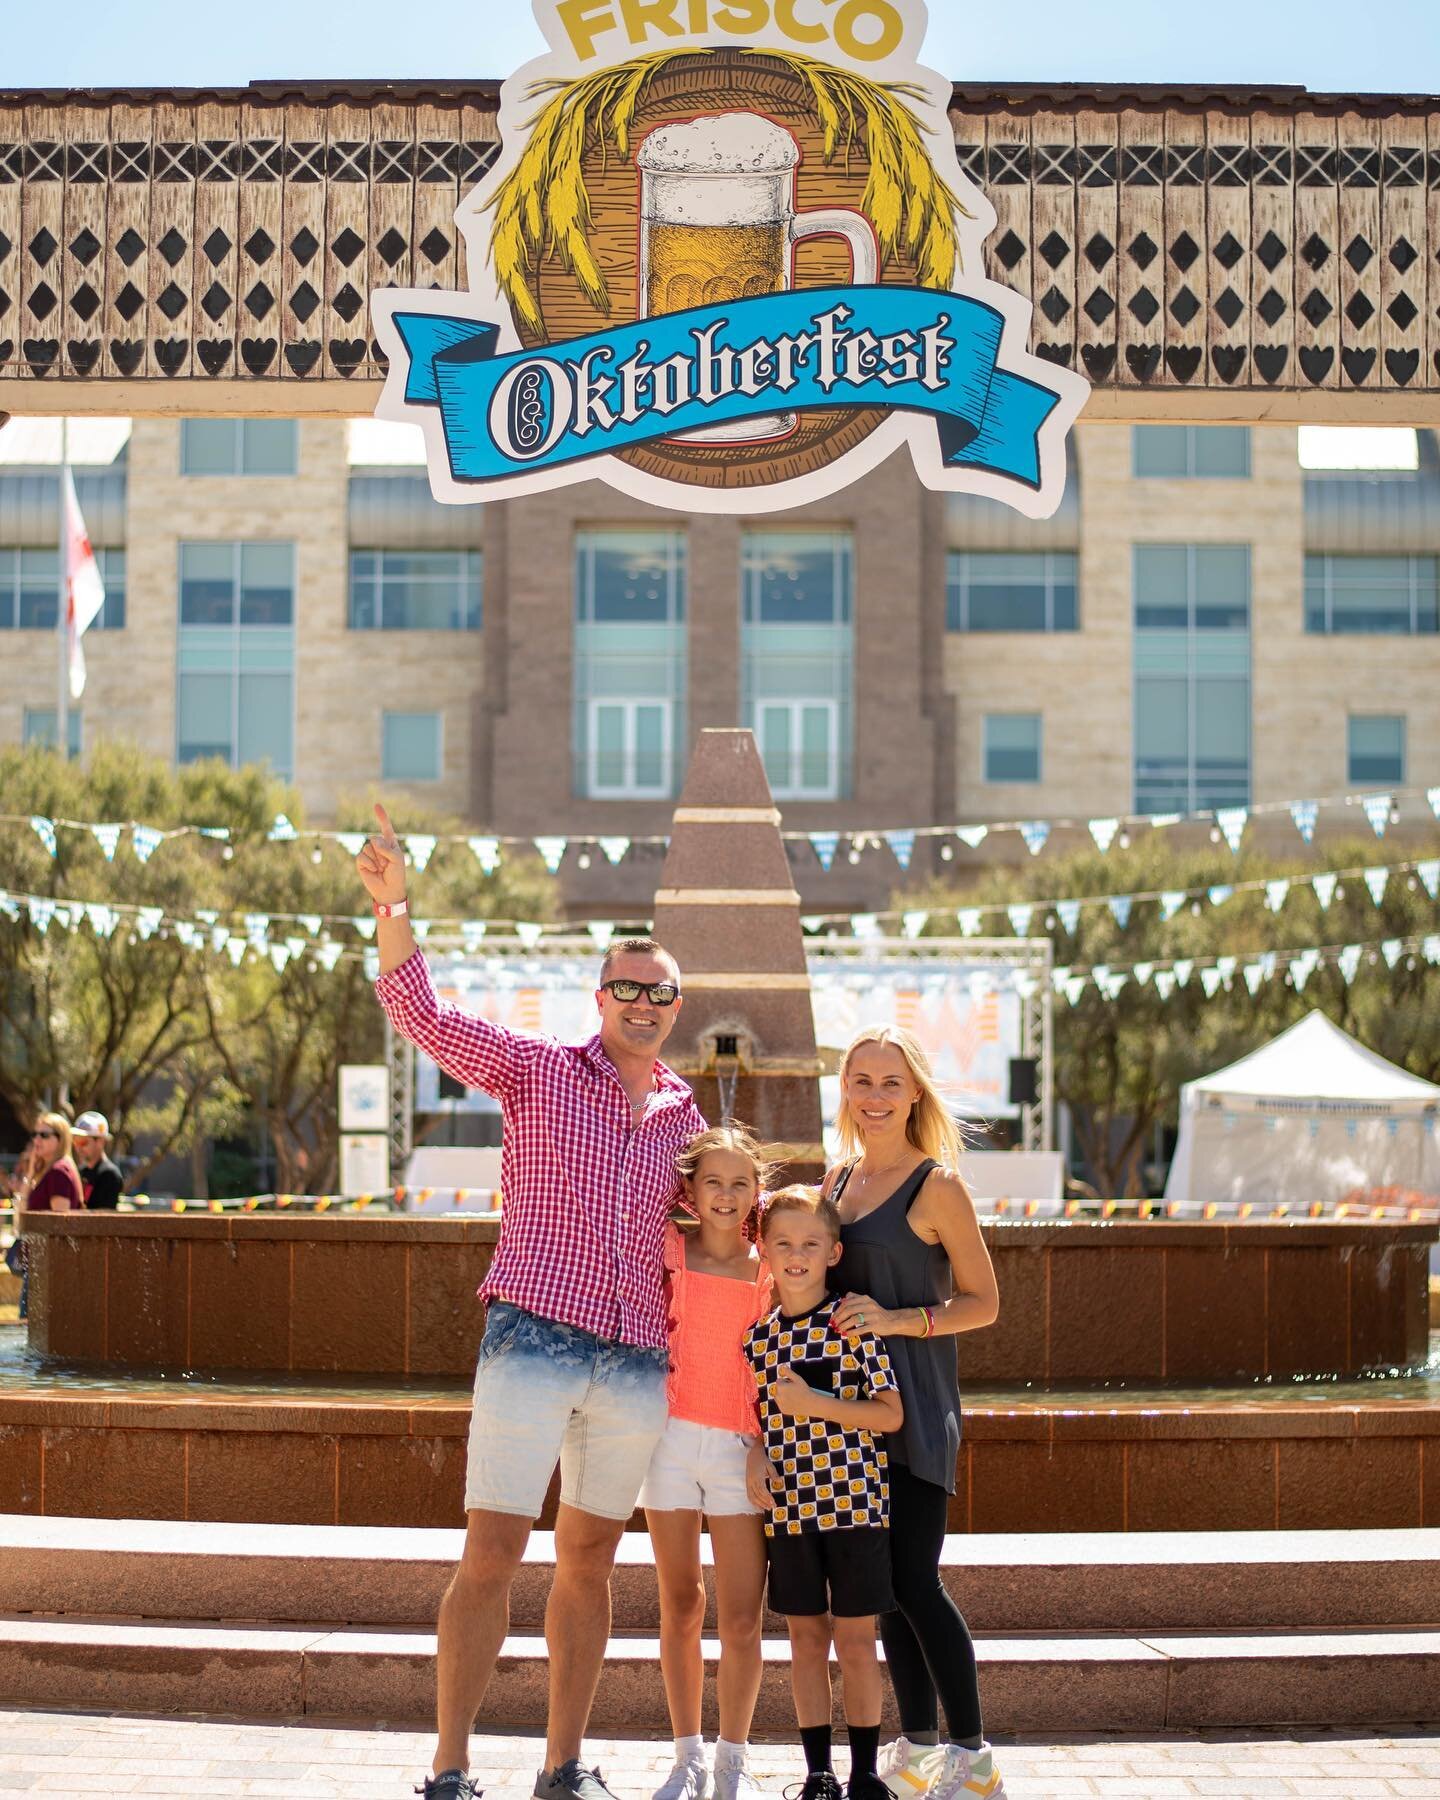 Frisco Oktoberfest: Fun for ALL! 🌭🍻🎪 🌟 Bring the whole crew because we've got something for everyone, including a delightful petting zoo! 🐾 See you this Saturday at @TheStarInFrisco! 😄 

#friscooktoberfest #pettingzoo #familyfun #events #thesta